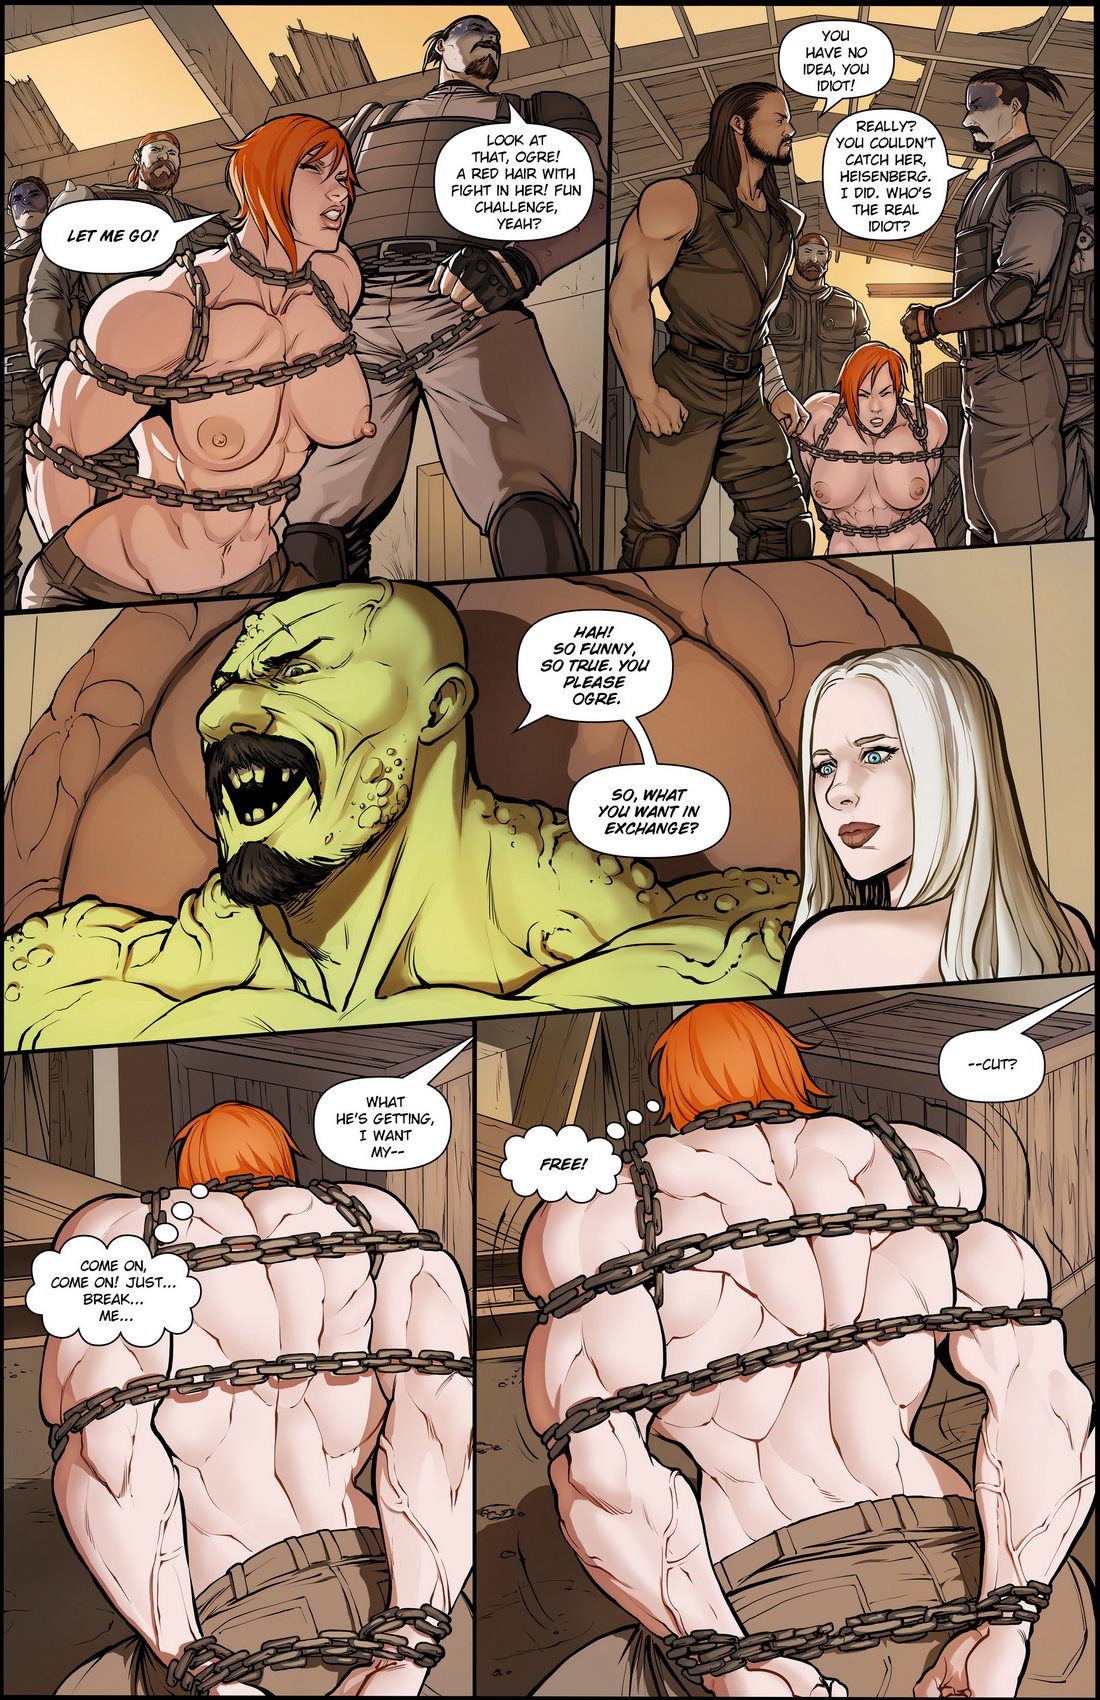 The Strong Shall Survive Issue 3 - MuscleFan page 4